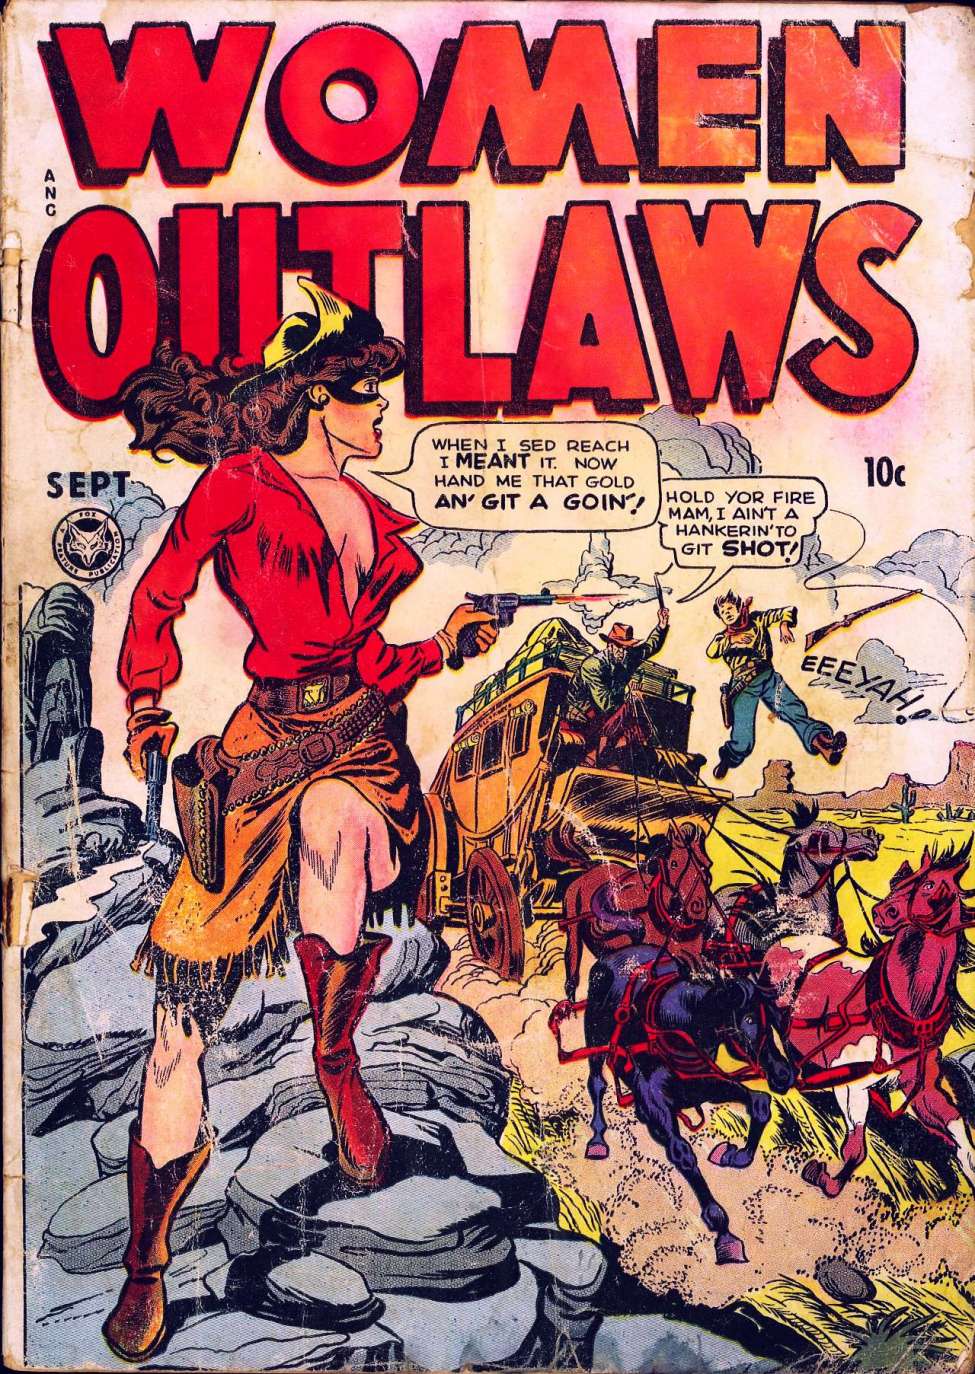 Comic Book Cover For Women Outlaws 2